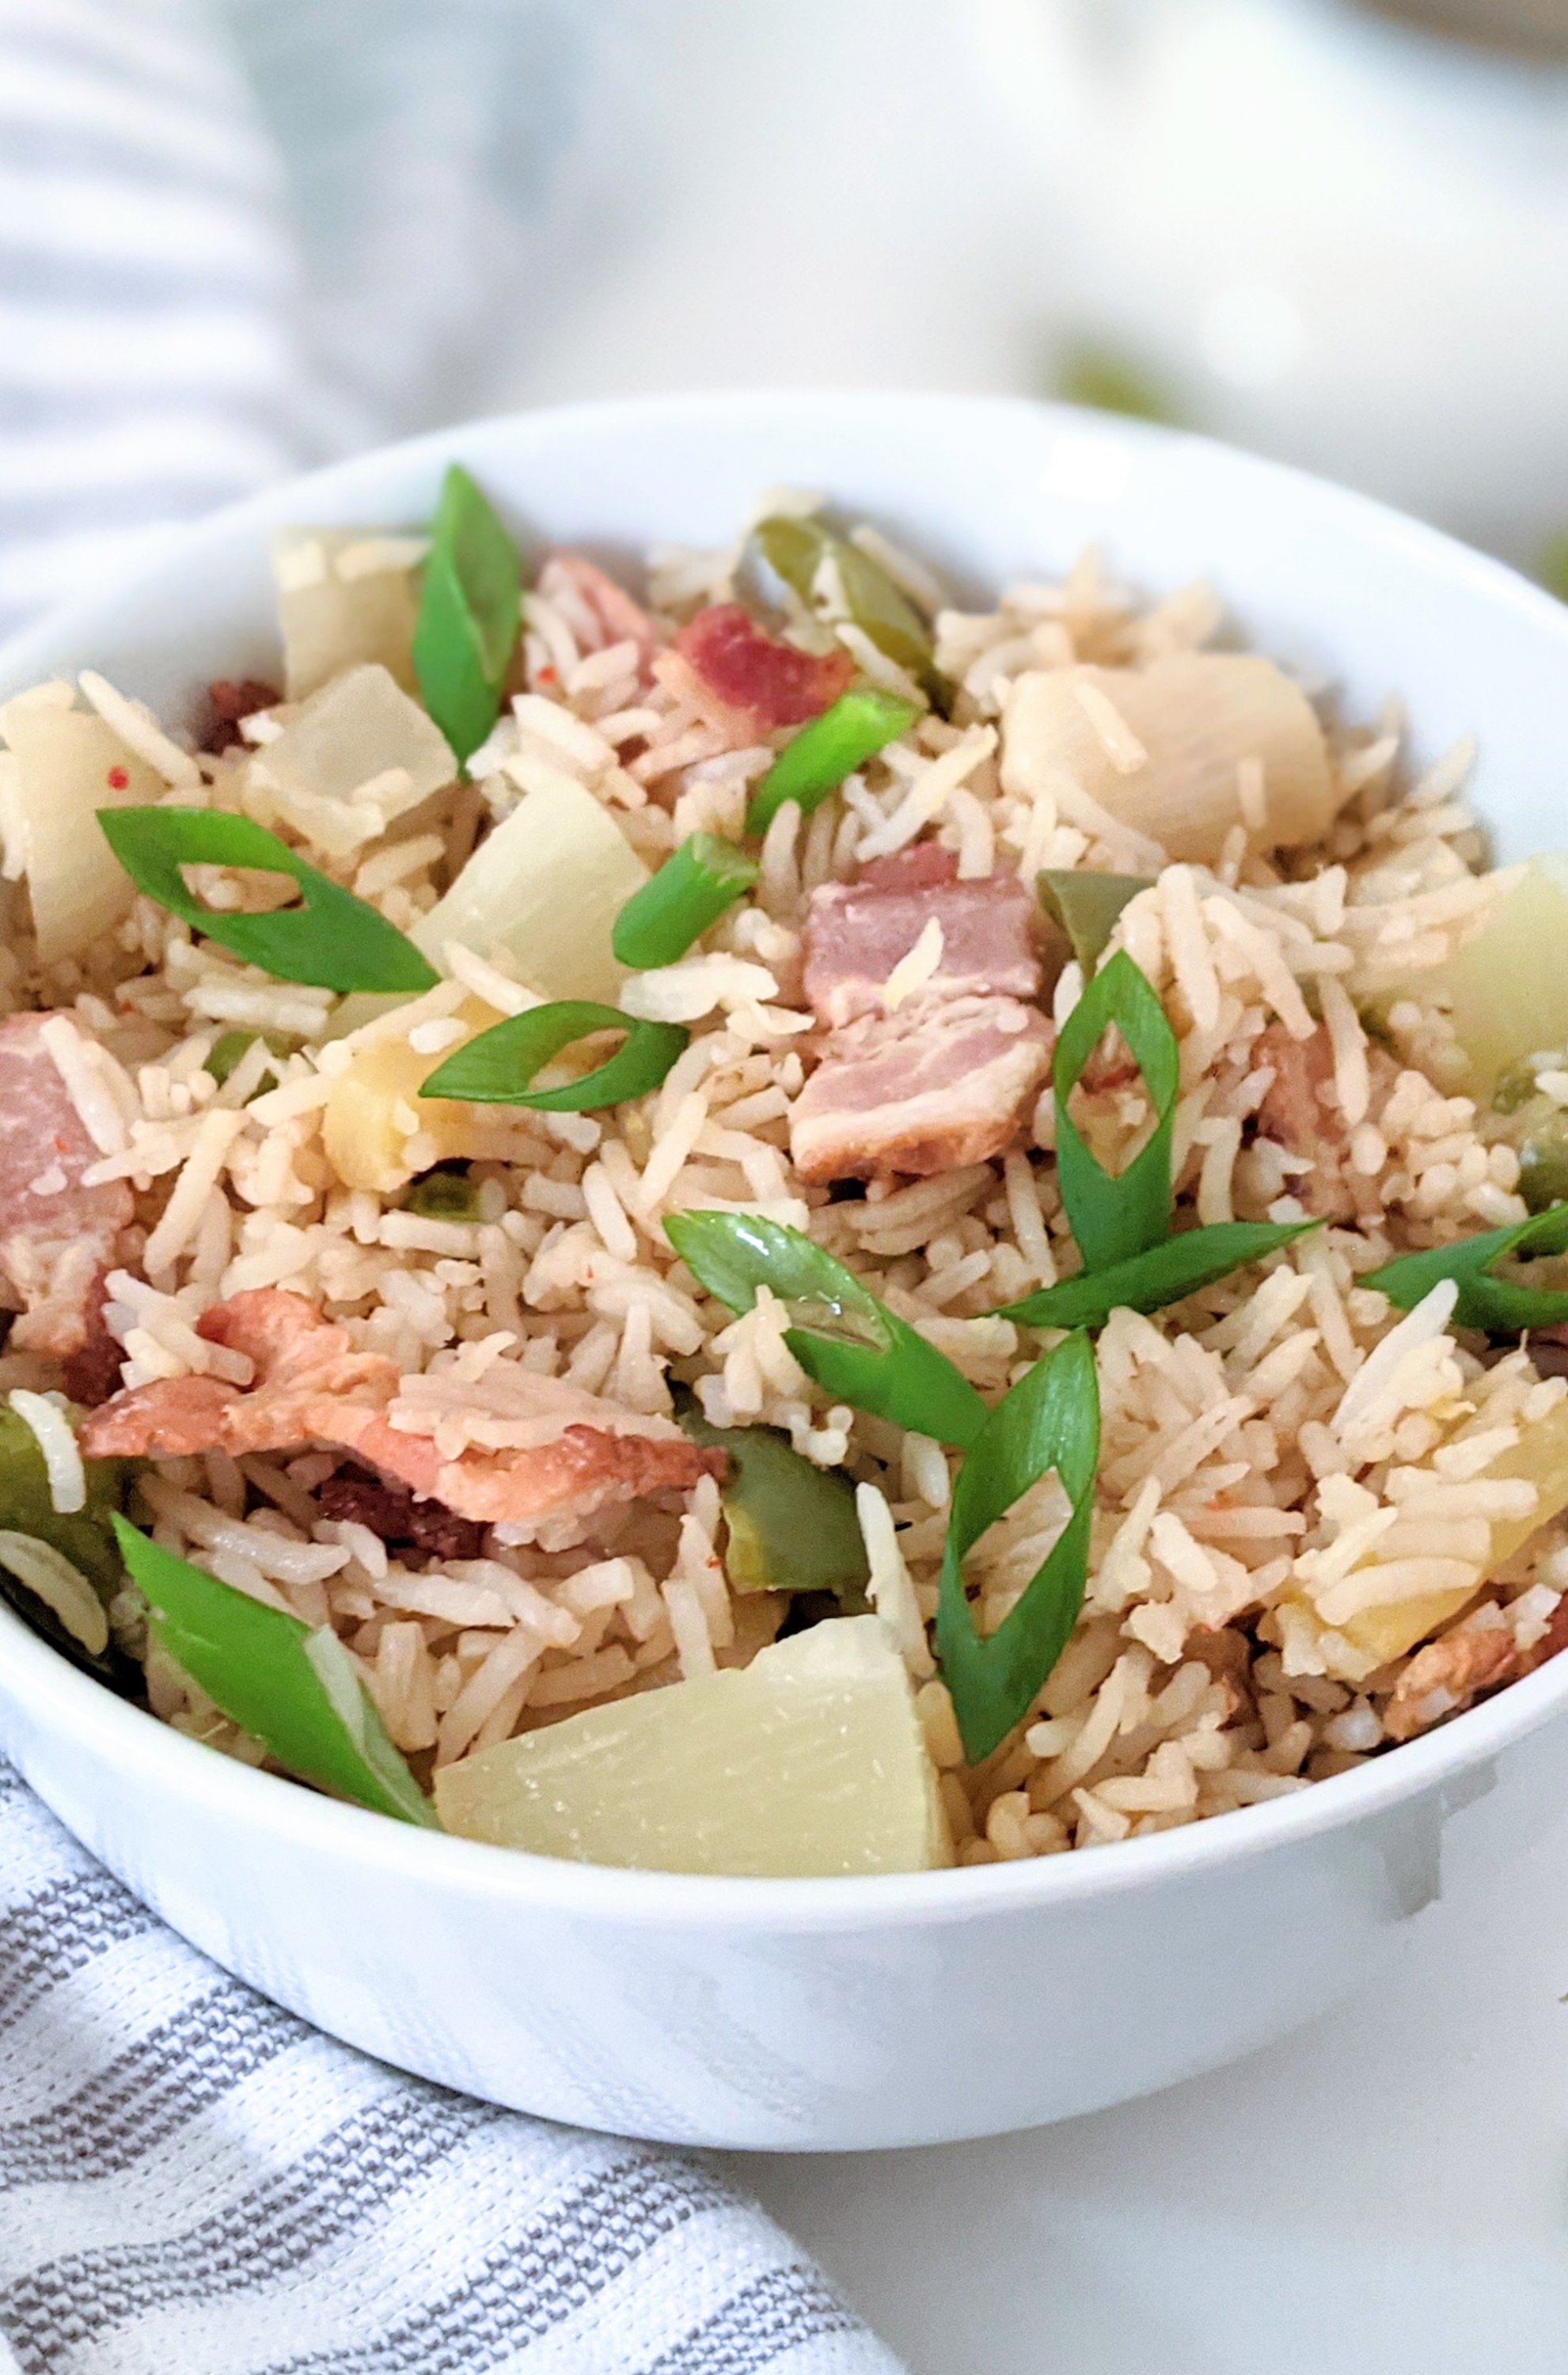 fried rice with bacon and pineapple recipe gluten free fried rice at home easy pineapple bacon fried rice for dinner or a quick lunch with leftover bacon recipes